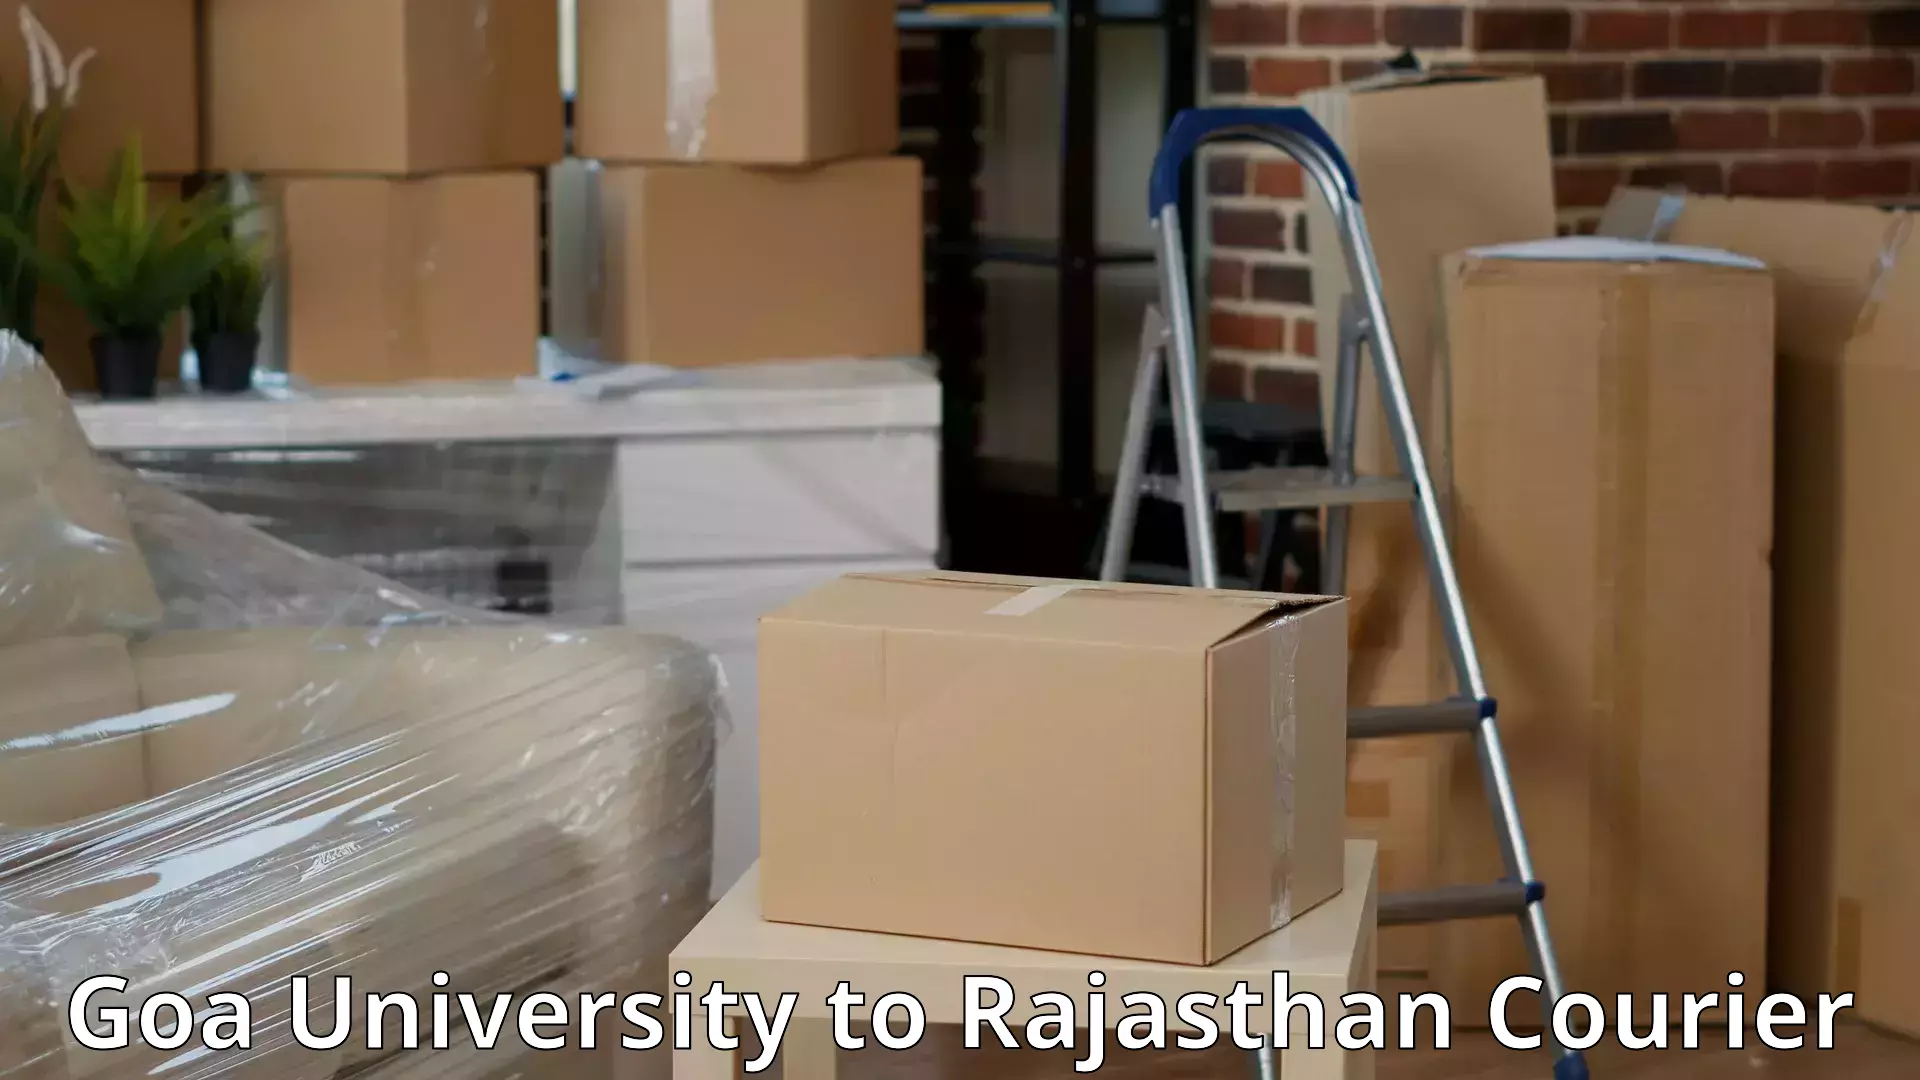 Residential moving experts Goa University to Rajasthan